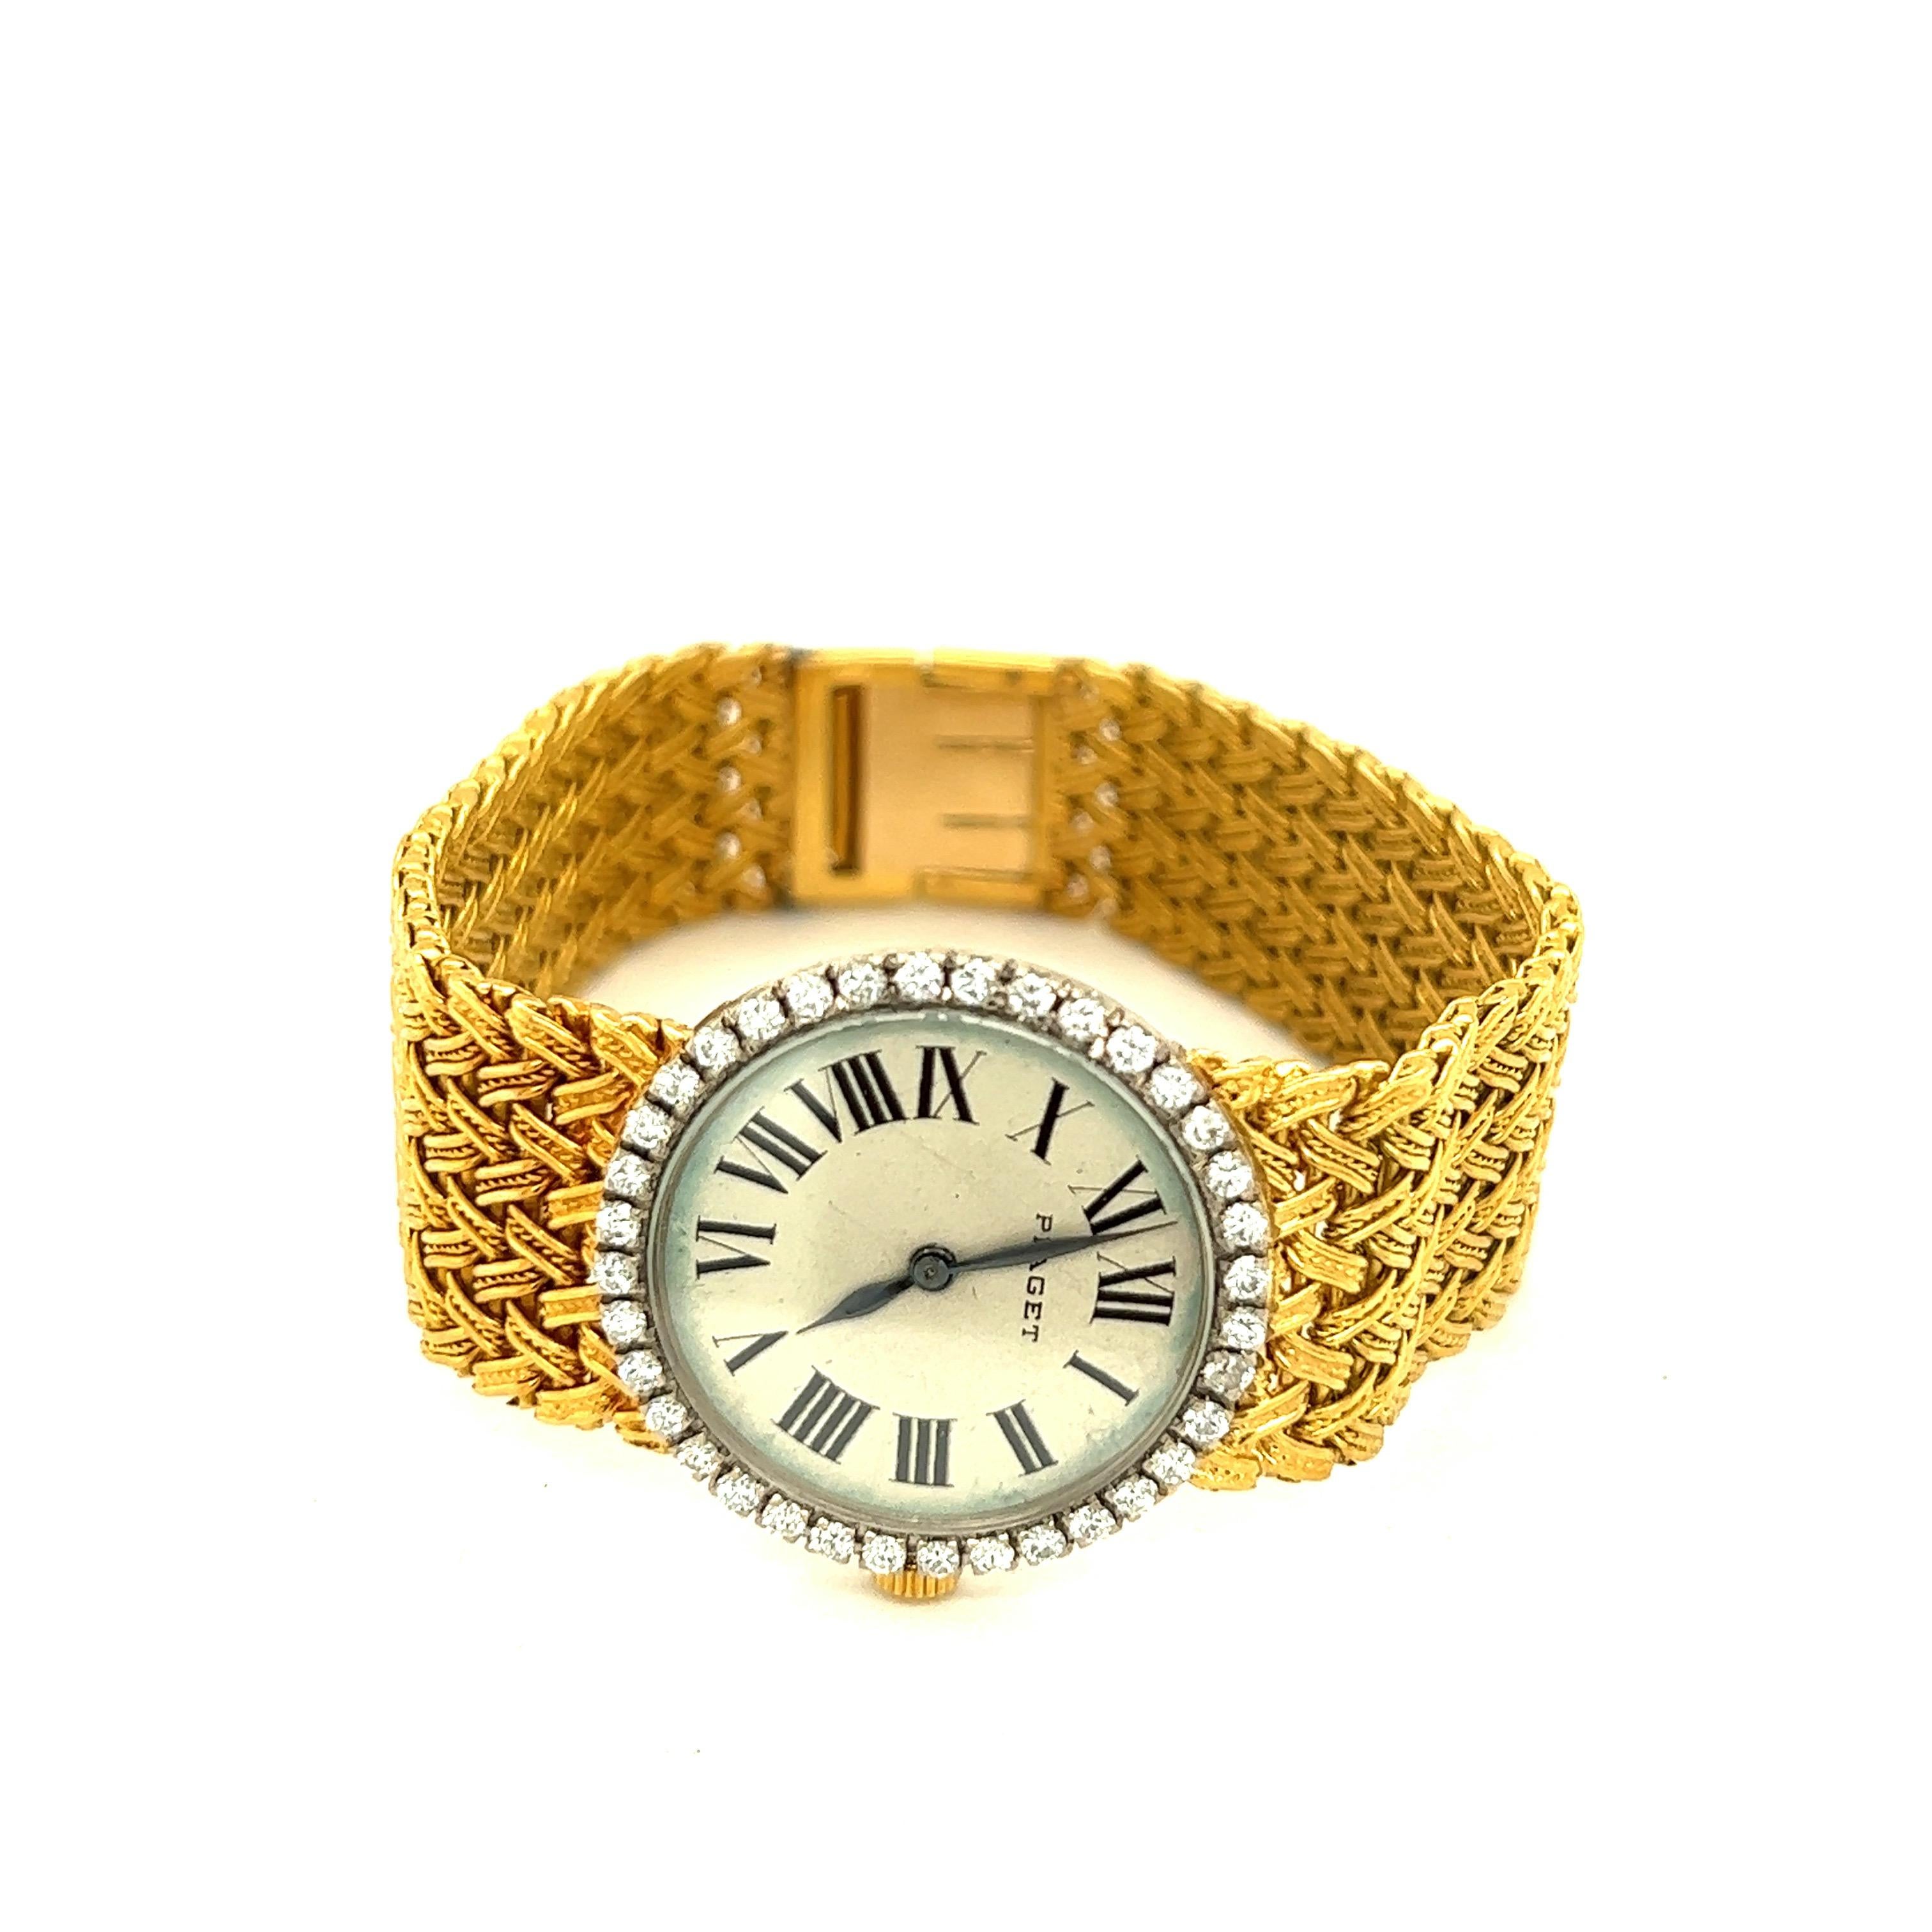 Piaget Diamond 18k Yellow Gold Lady's Wristwatch

Round-shaped case (2 cm) lined with 36 round-cut diamonds of approximately 0.72 carat total, featuring Roman numerals for time; accompanied by 18 karat yellow gold straps with braided motif; made by